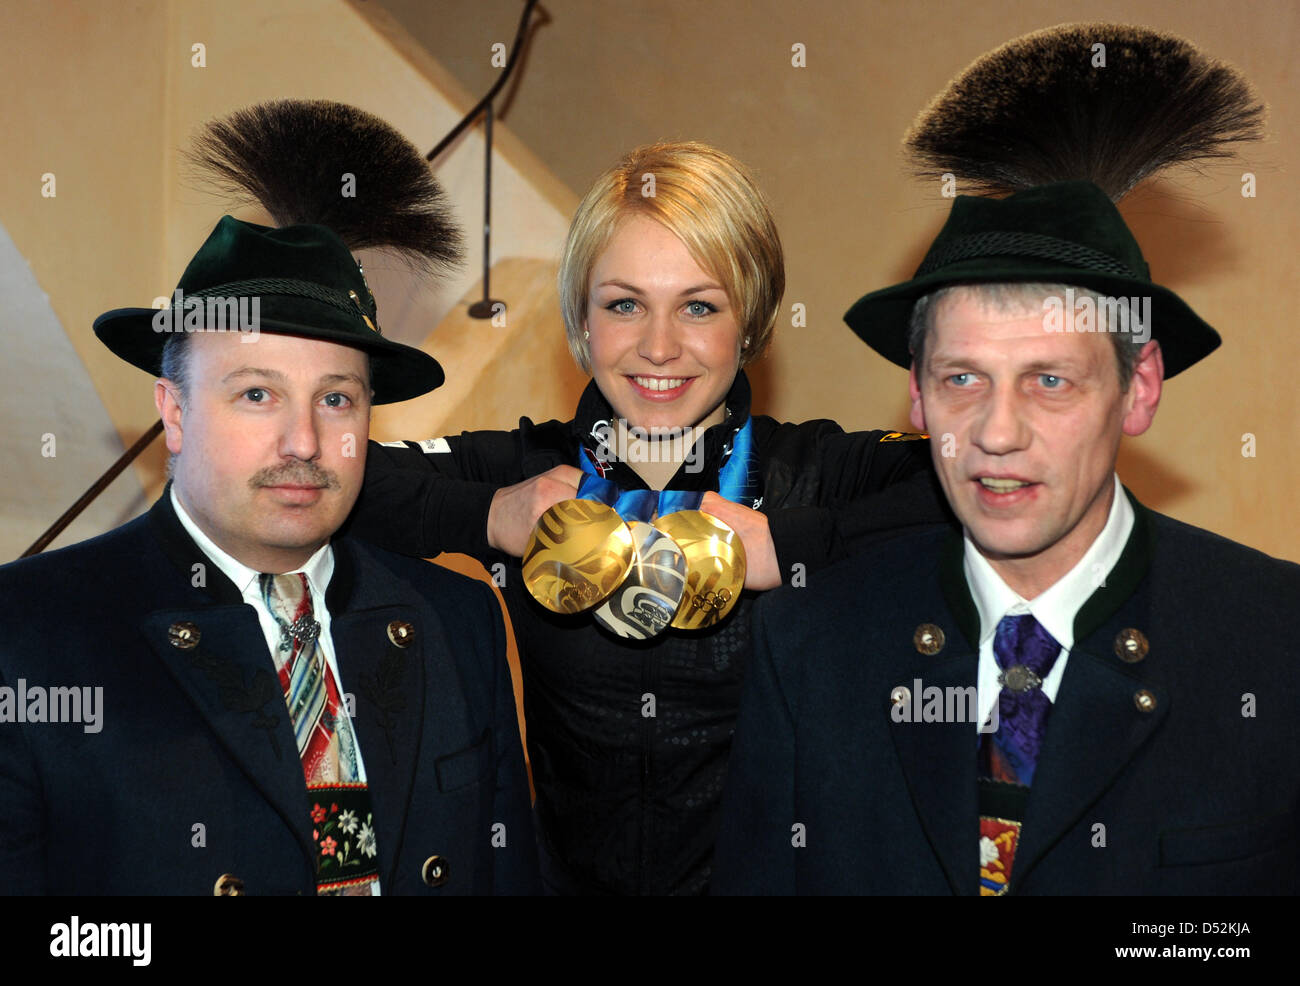 German biathlete Magdalena Neuner poses with her medals next to two men in traditional clothing during the reception in her home town Wallgau, Germany, 05 March 2010. Neuner won two gold medals and one silver medal at the Olympic Winter Games 2010 in Vancouver, Canada and is expected on a specially built stage on the town square in the late afternoon. Photo: TOBIAS HASE Stock Photo